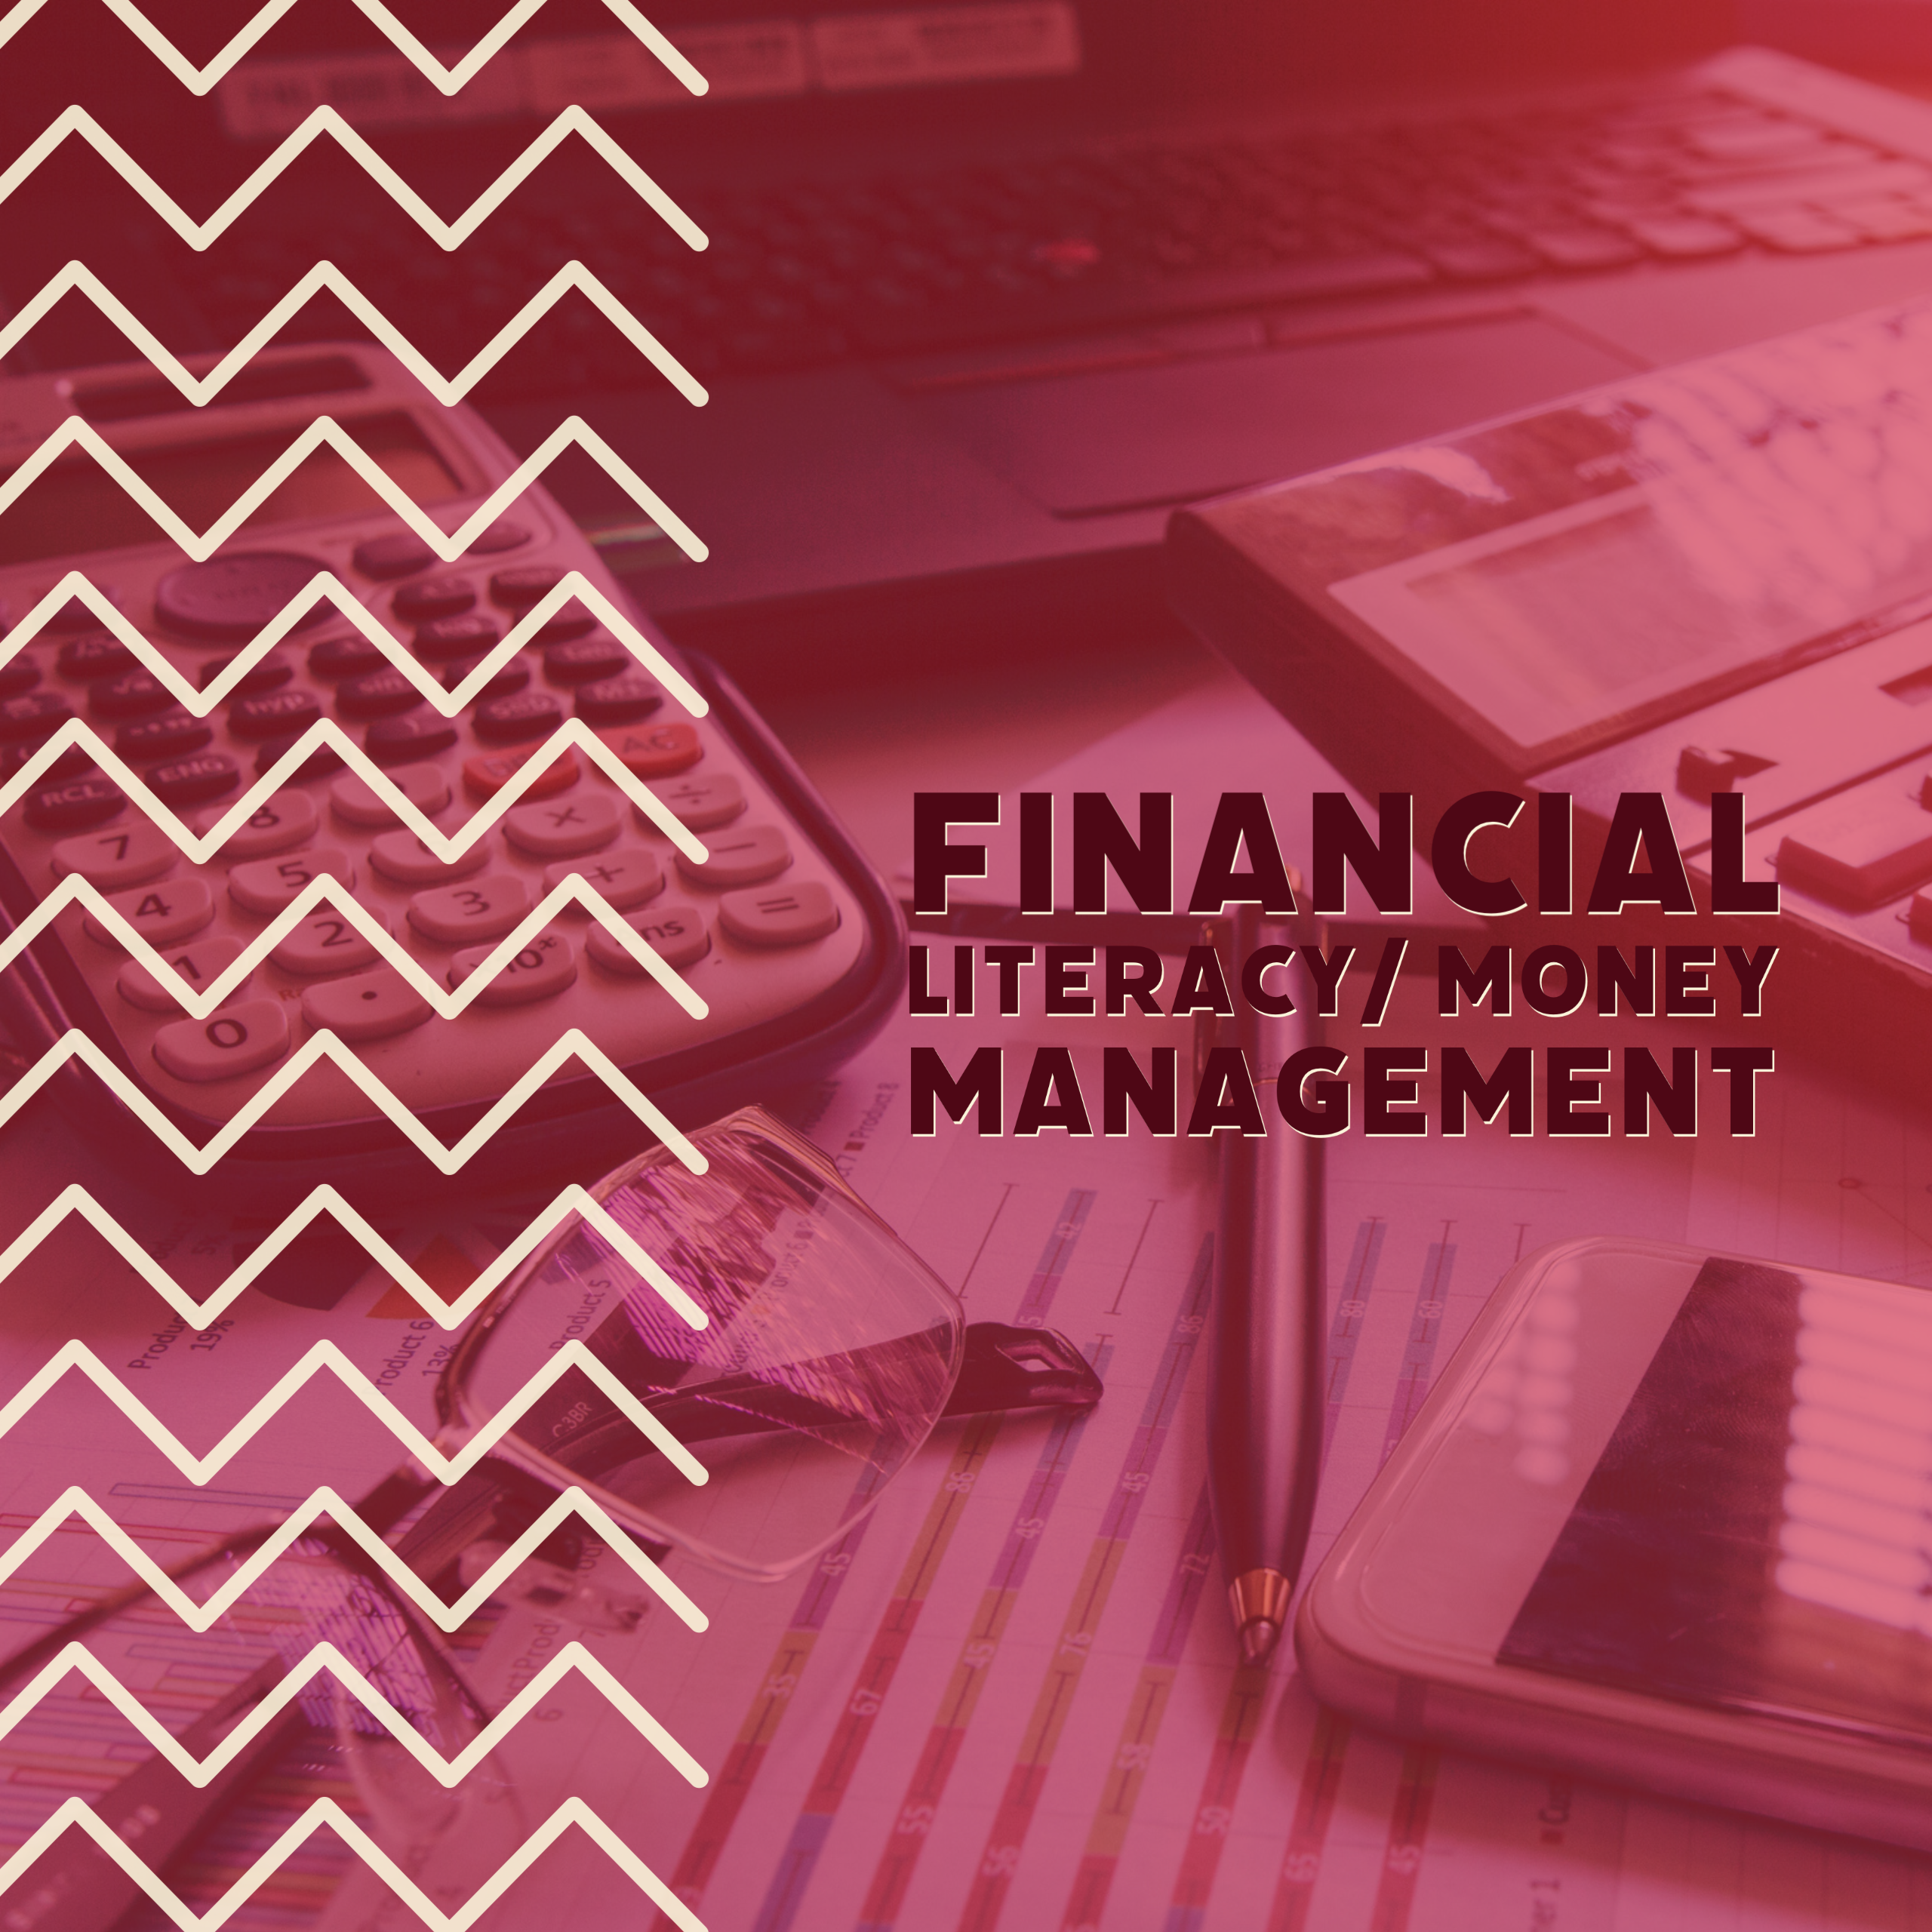 Financial Literacy and Money Management Link